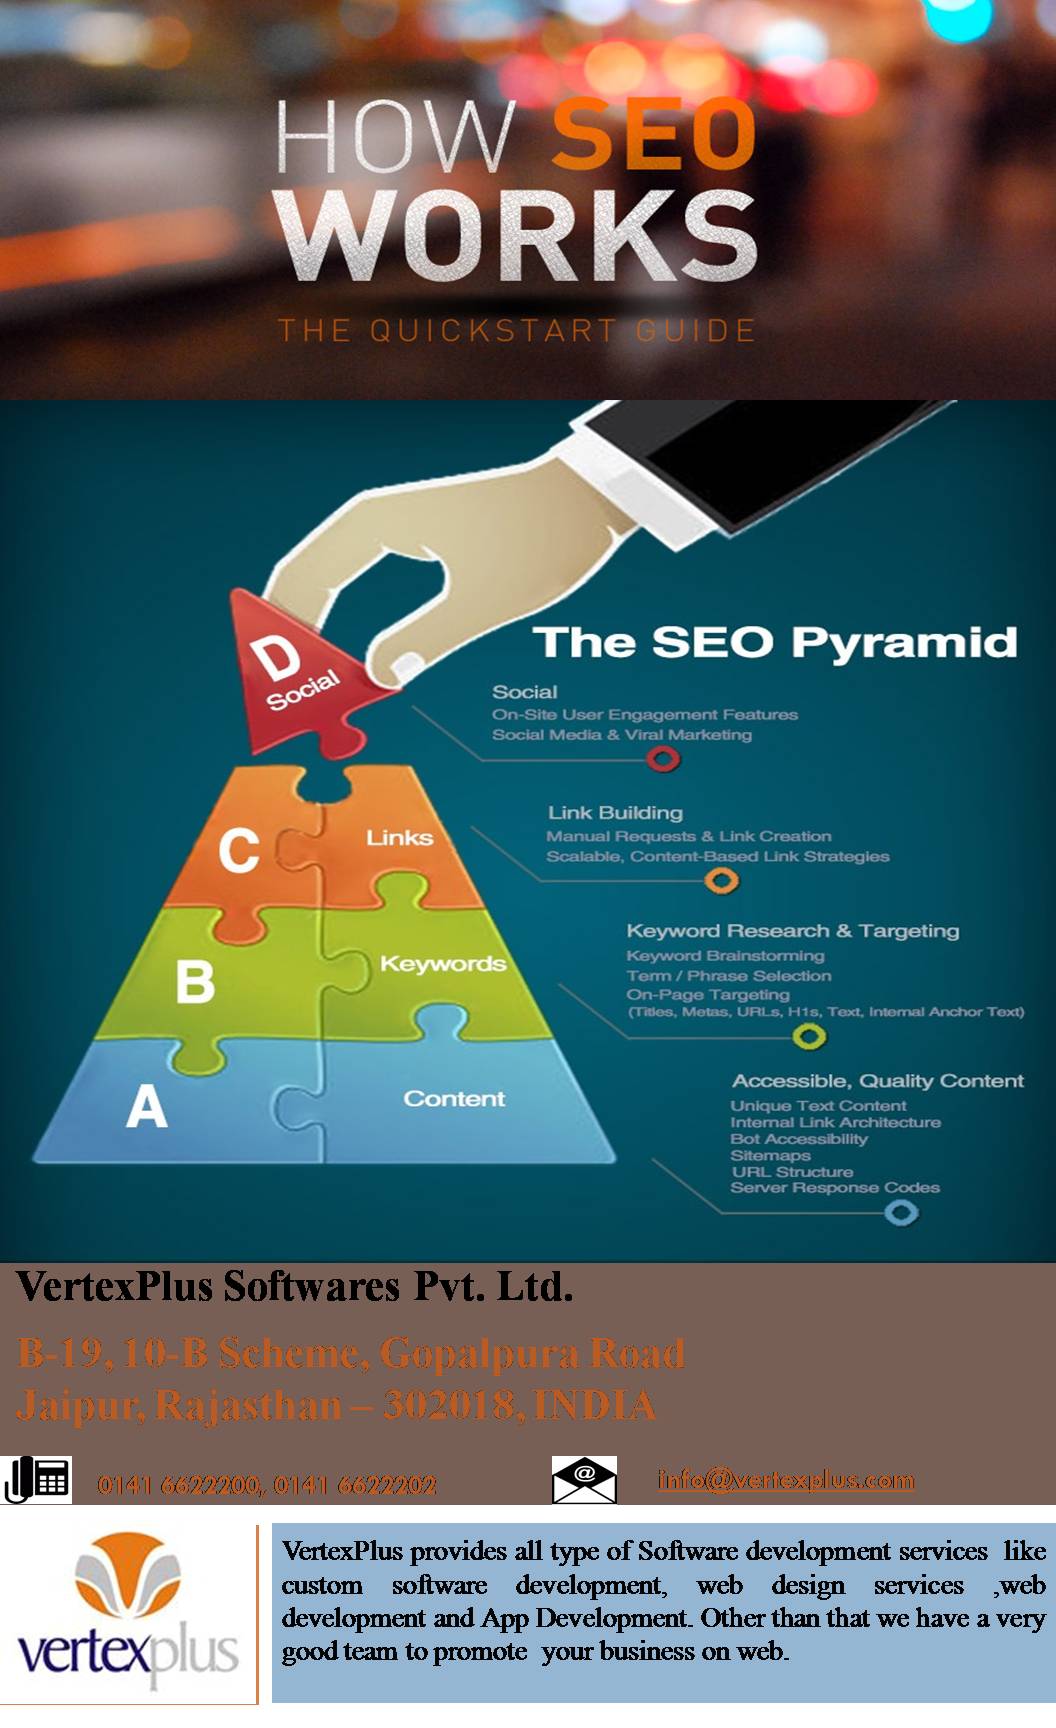 VertexPlus Search Engine Optimization Services This infographic is about how SEO exactly works and what steps should be followed for good SEO services. by vertexplus